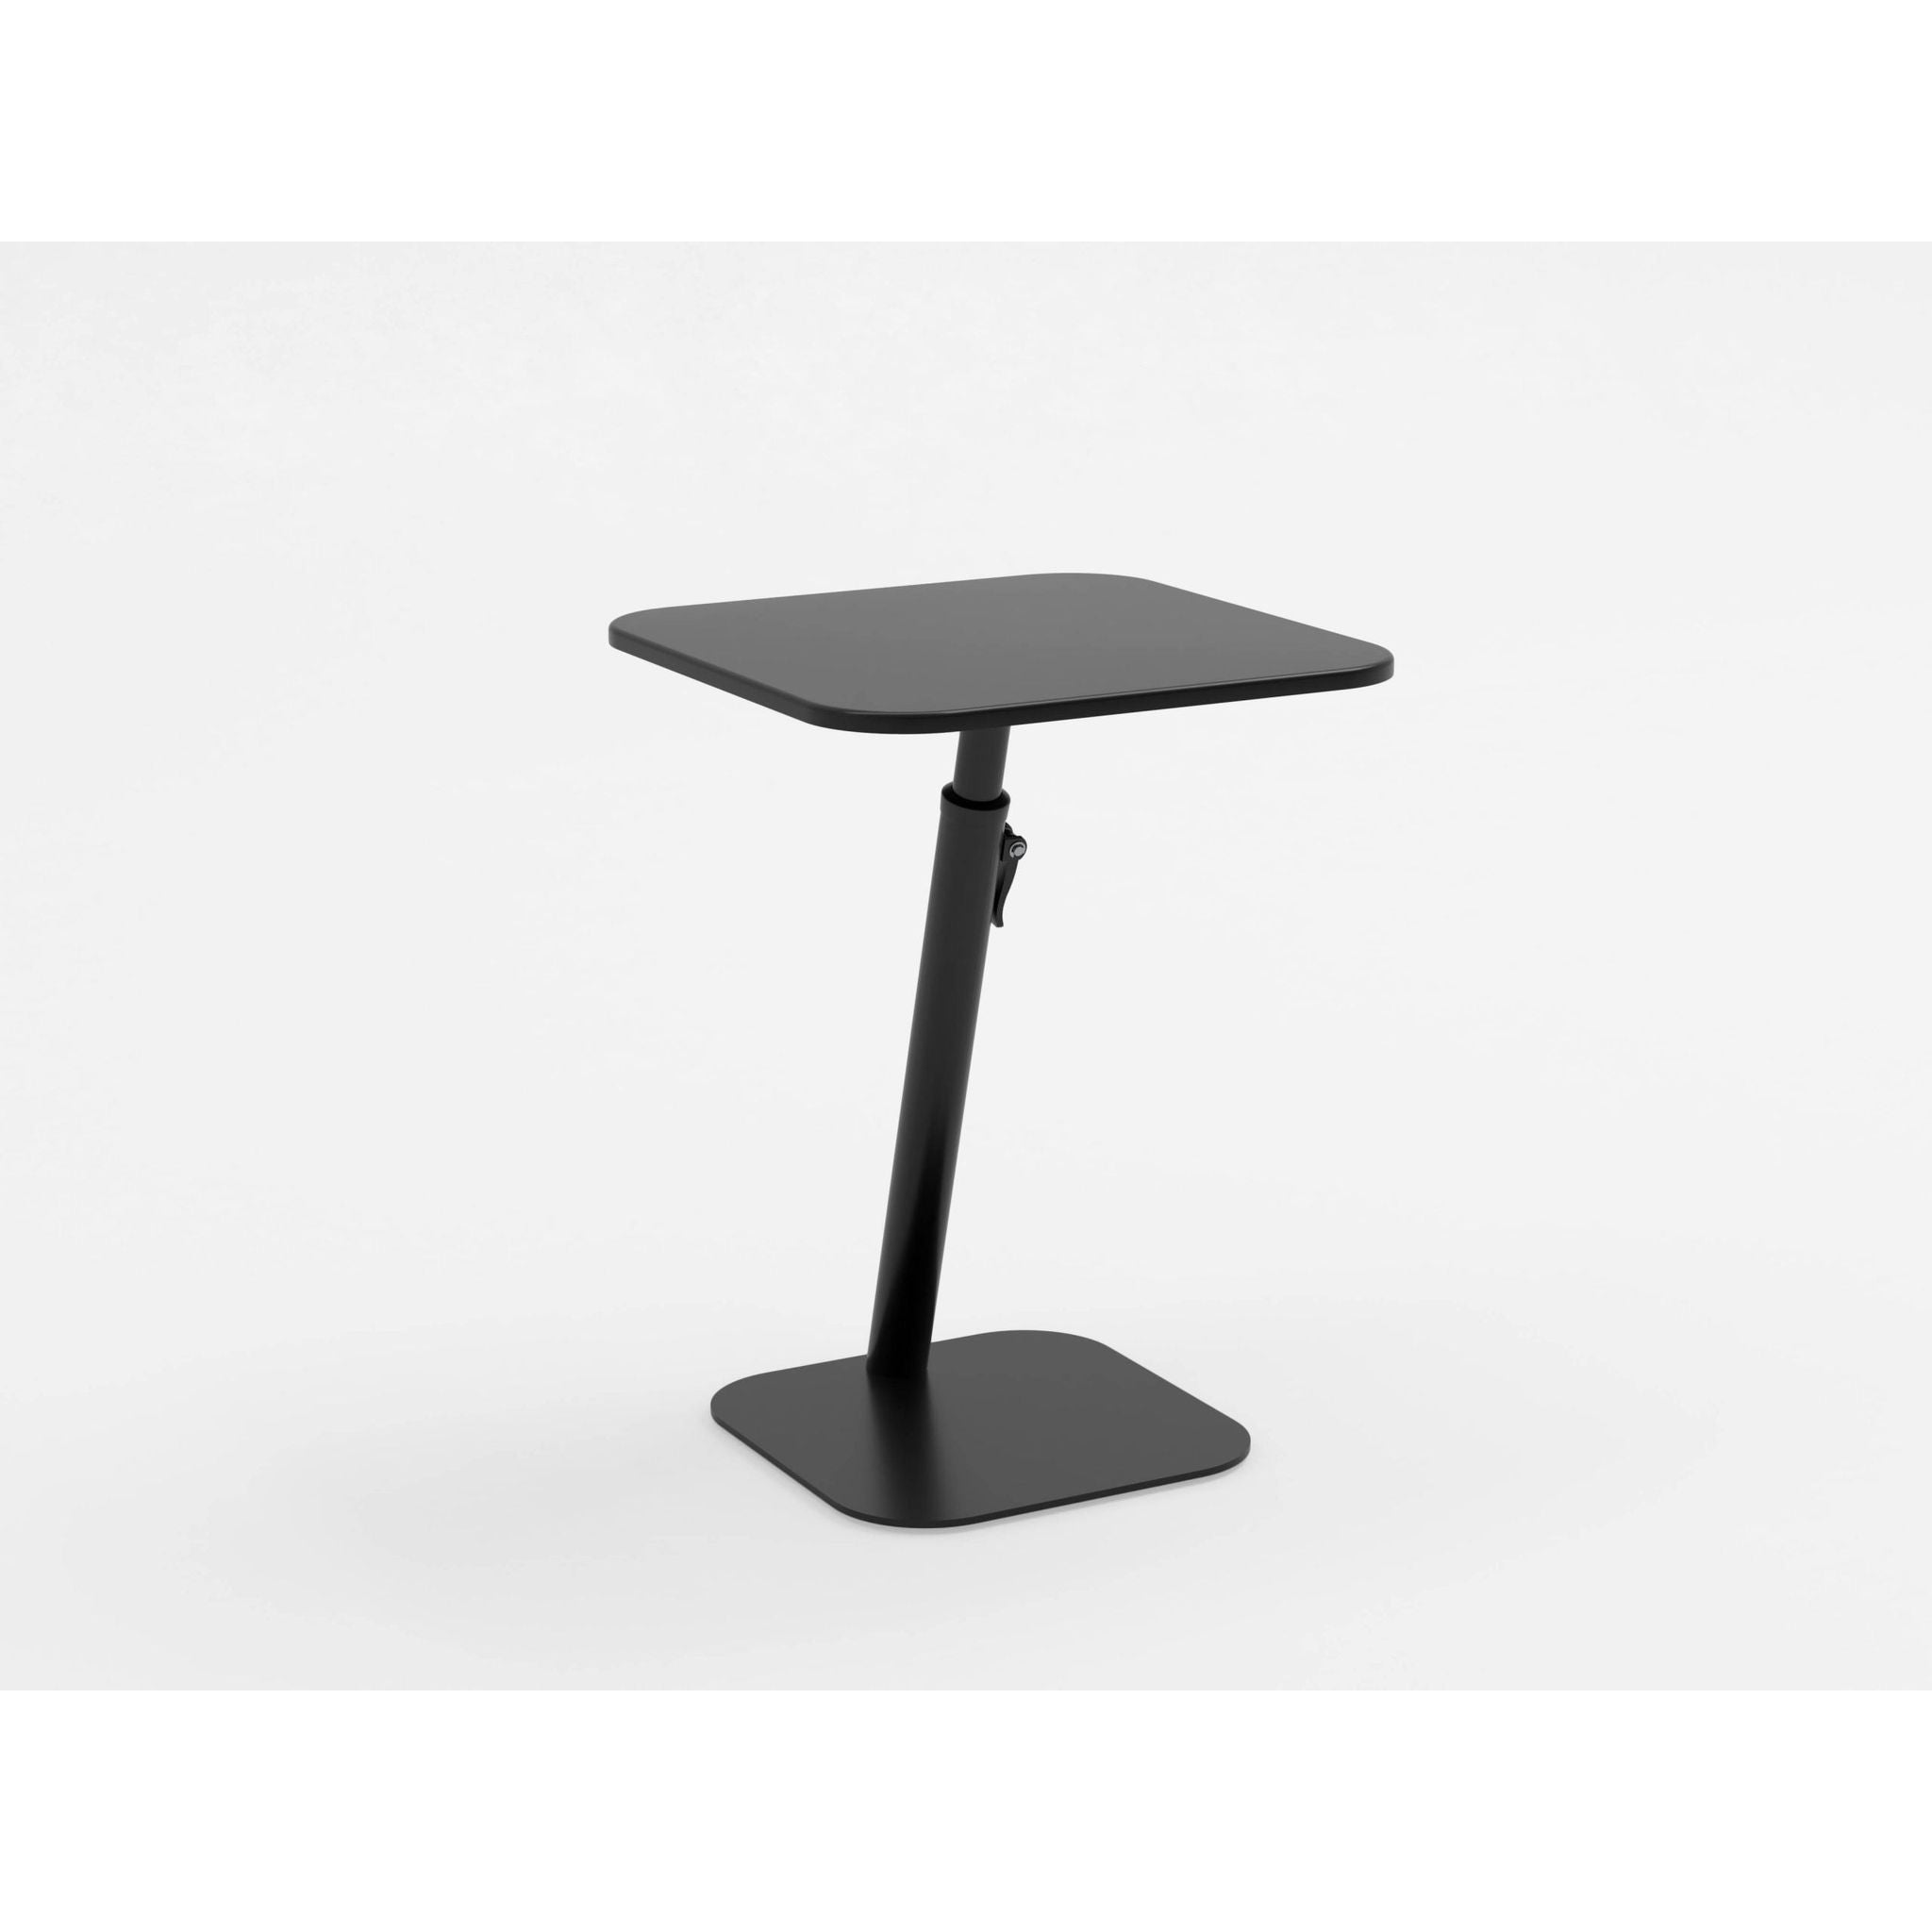 Marco Polo Height Adjustable Side Table